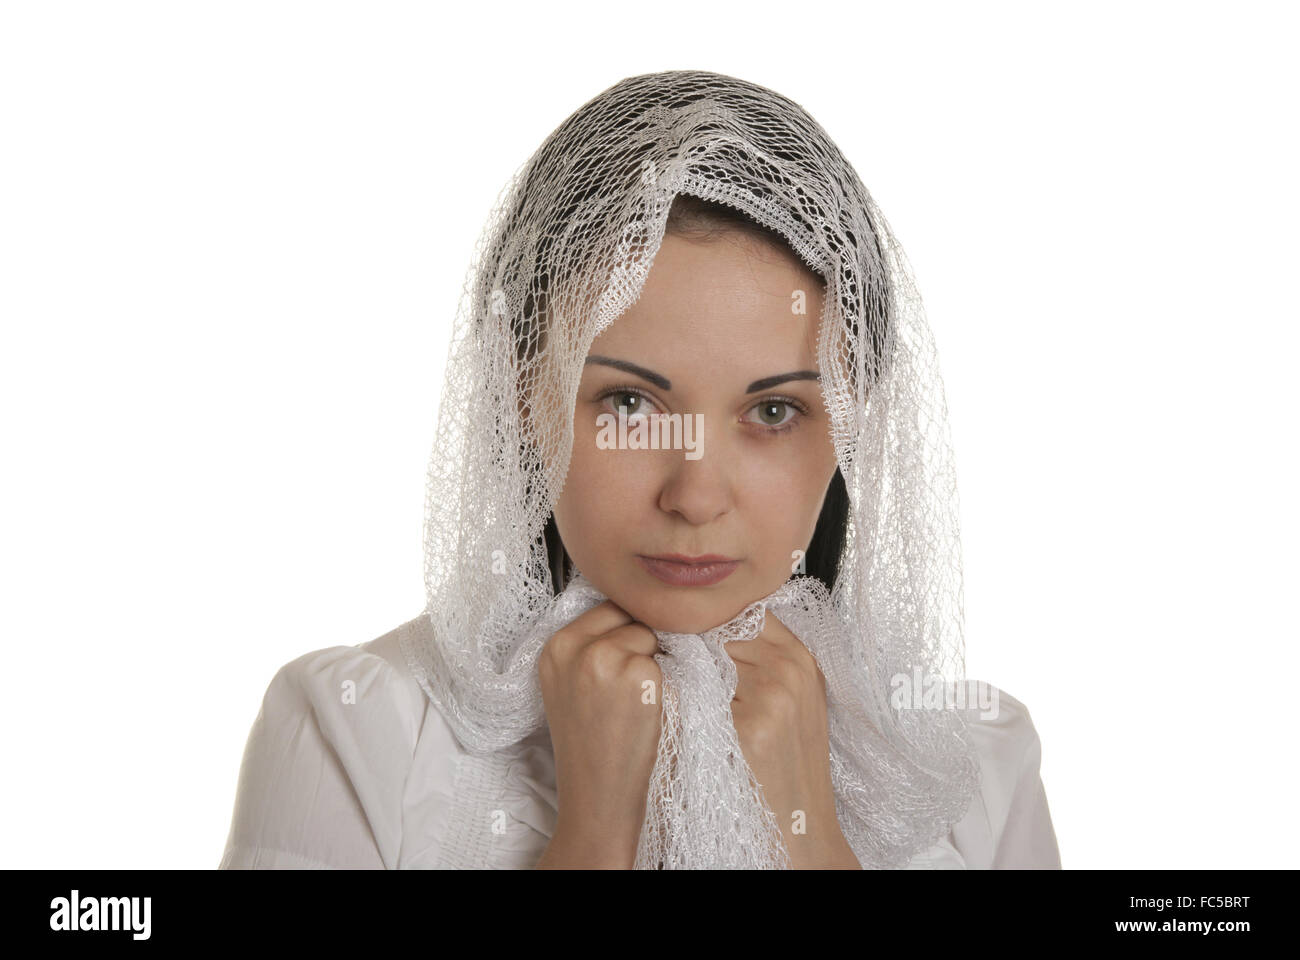 Defenceless woman with head scarf Stock Photo